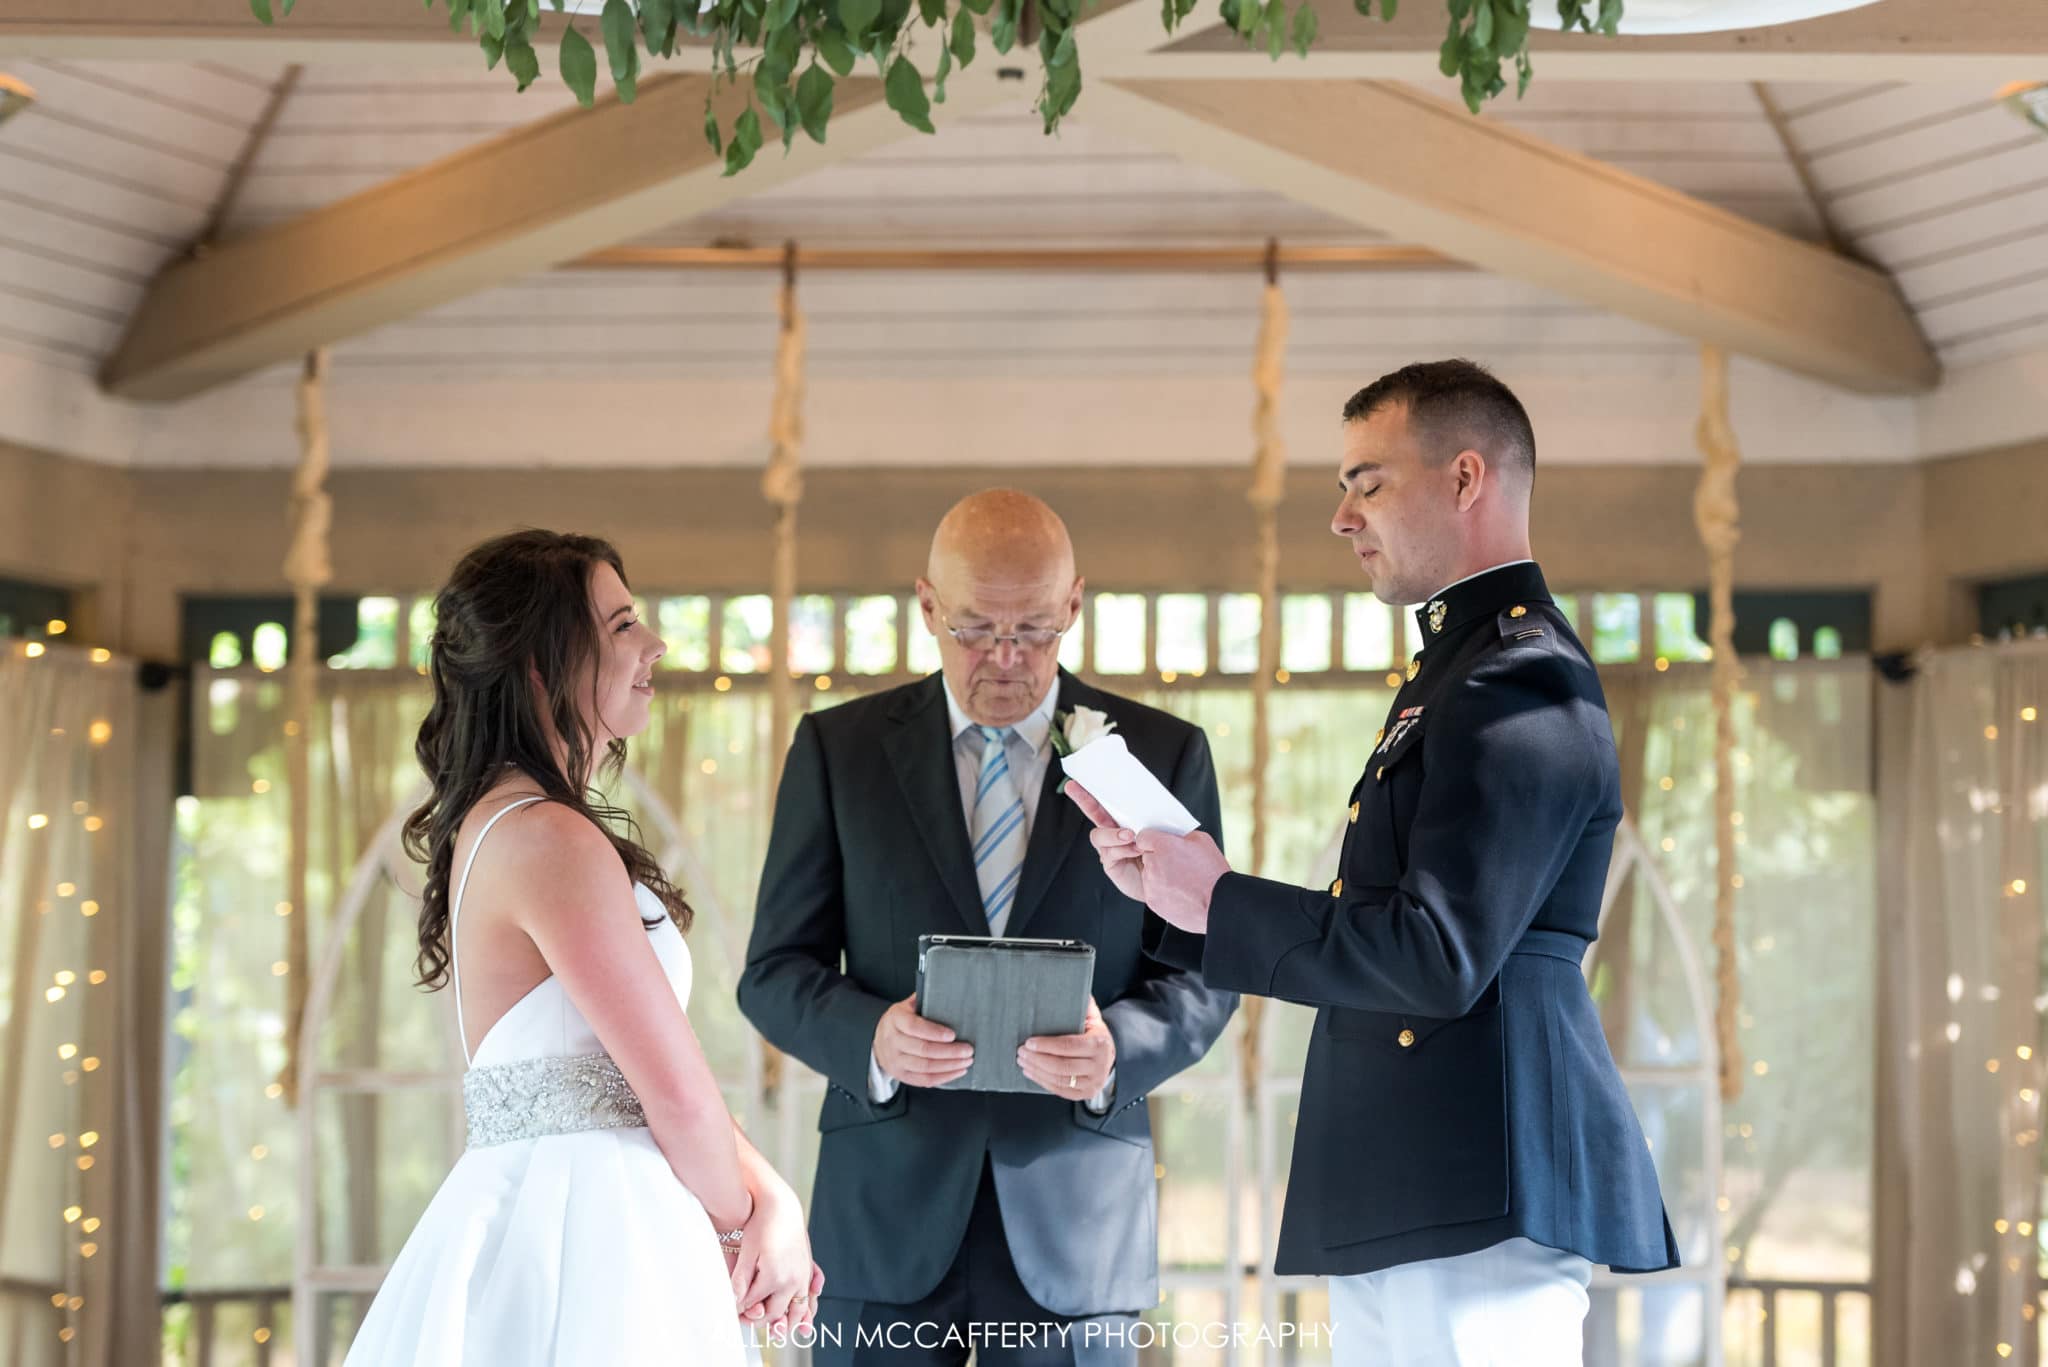 exchanging vows at the ceremony at Scotland Run